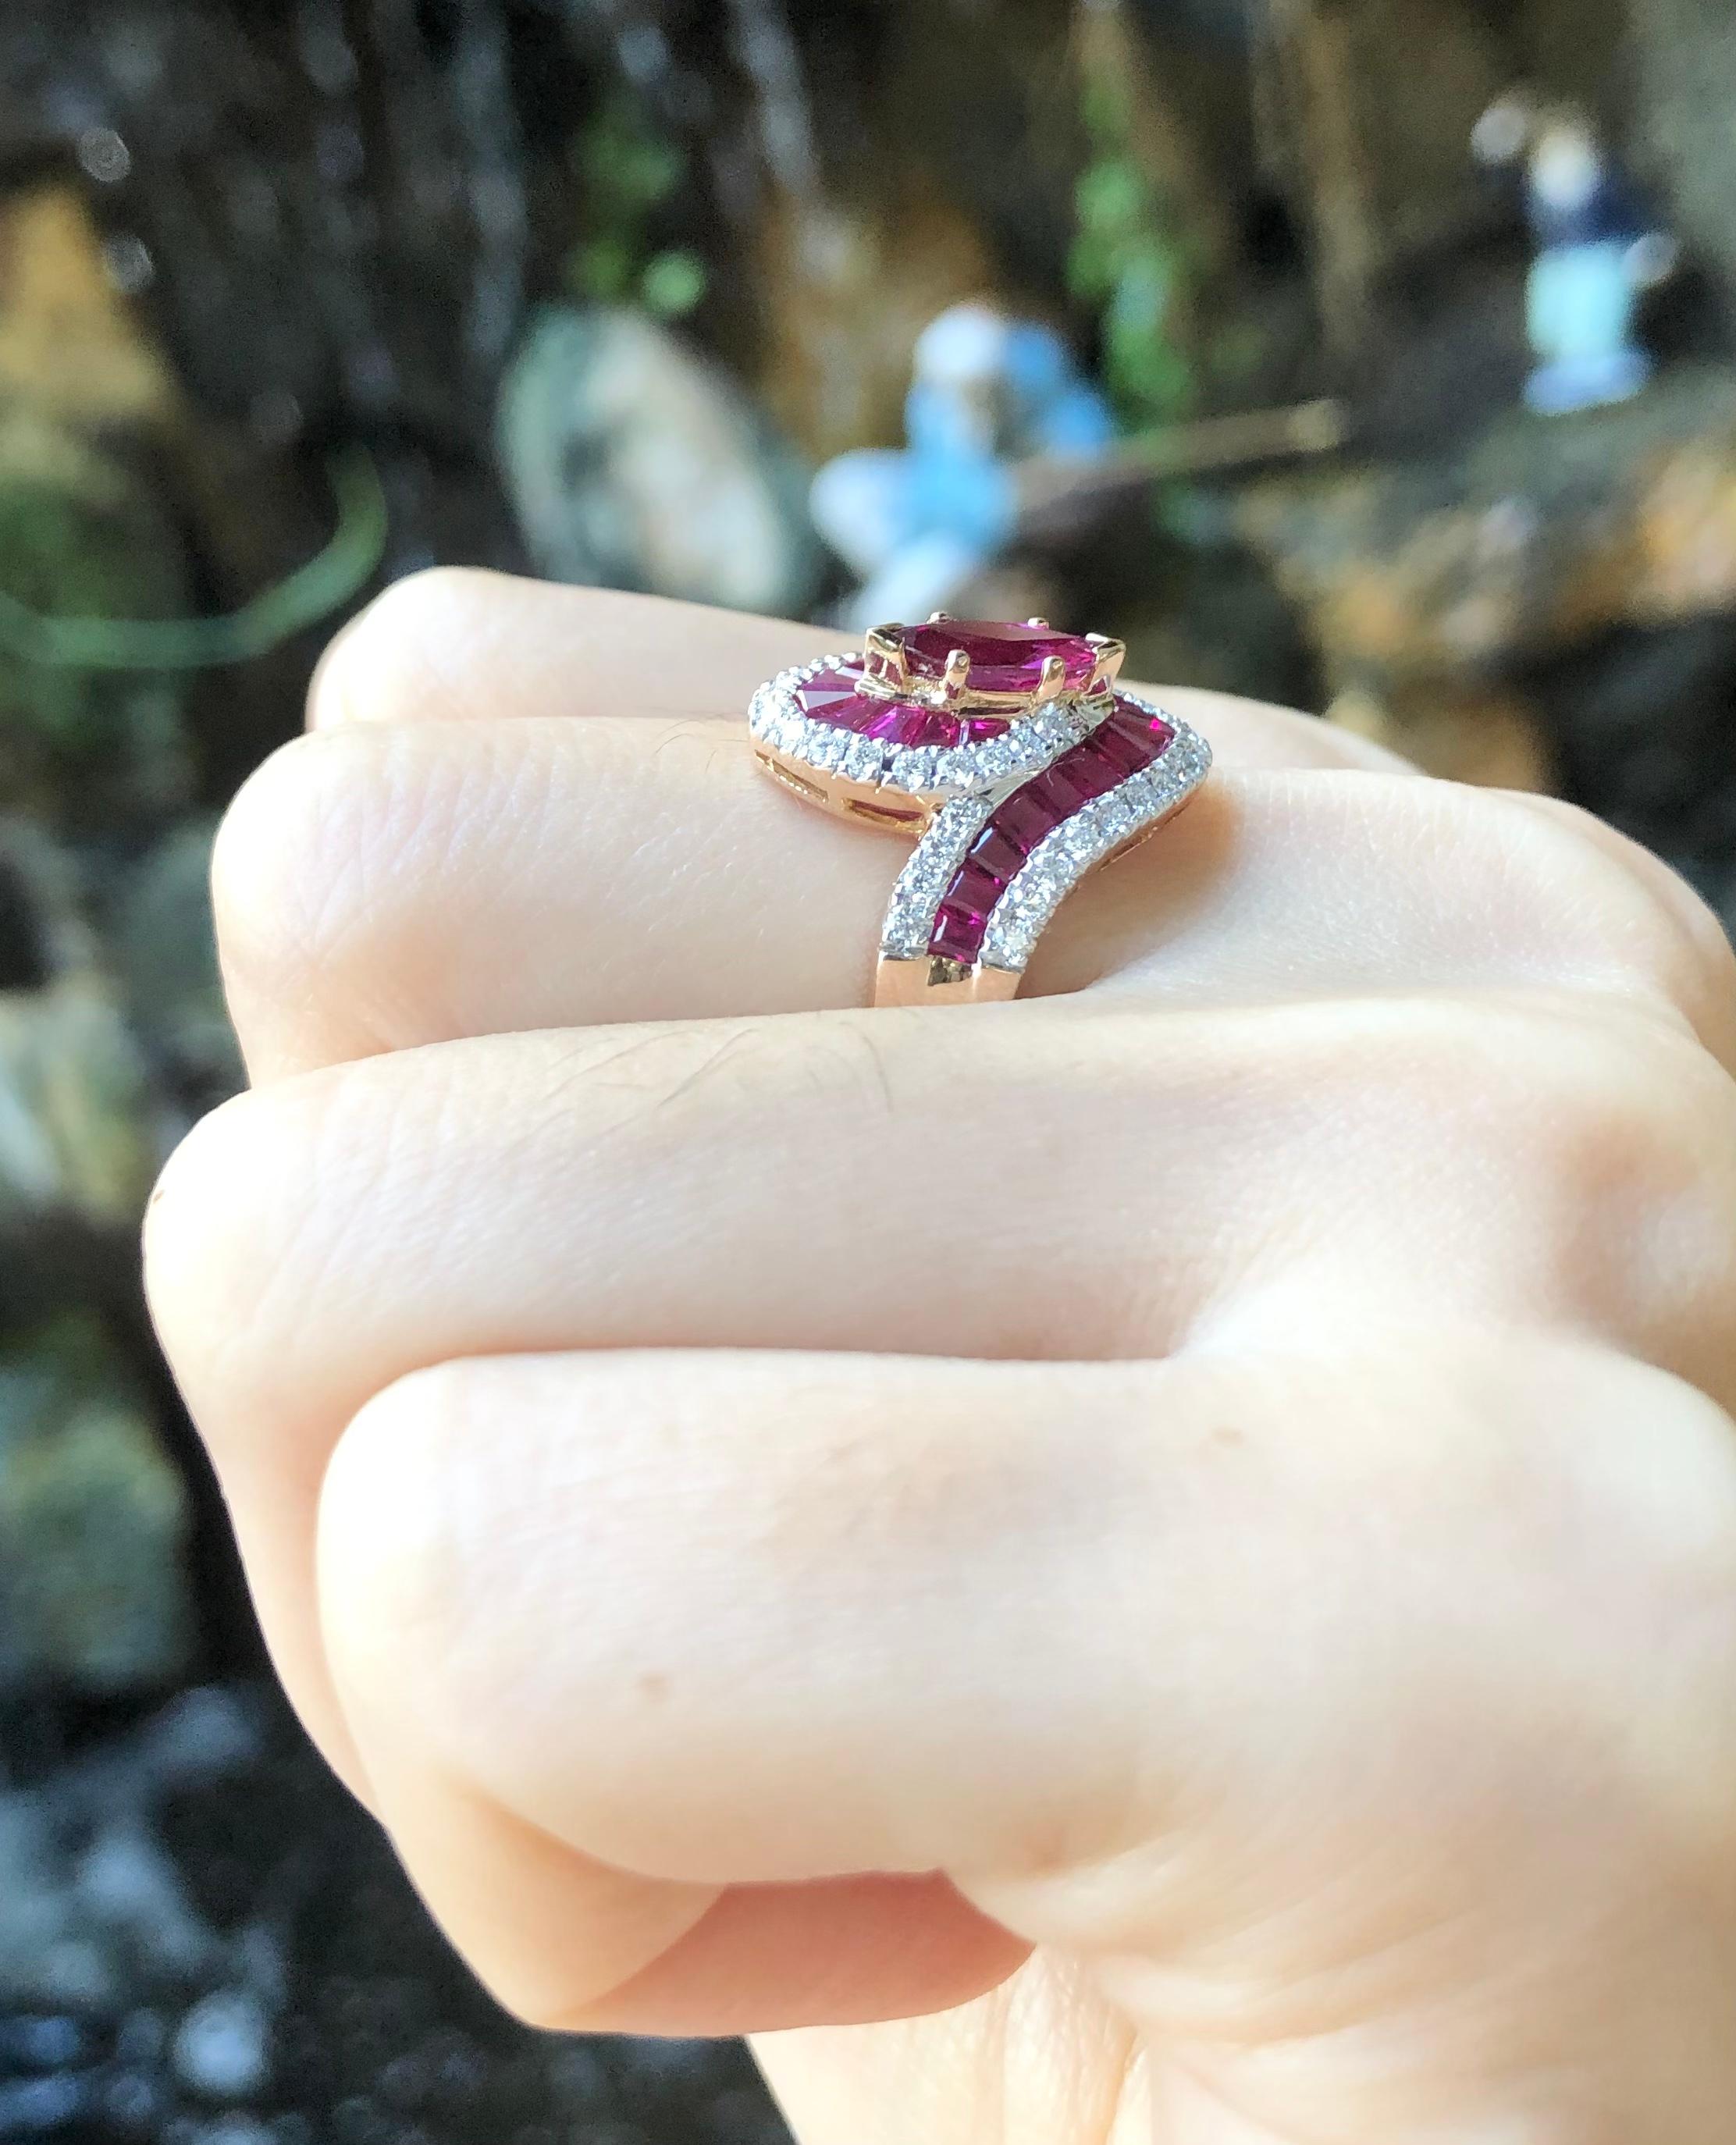 Ruby 0.79 carat with Ruby 2.58 carats and Diamond 0.51 carat Ring set 18 Karat Rose Gold Settings

Width:  1.2 cm 
Length: 1.9 cm
Ring Size: 51
Total Weight: 7.59 grams

